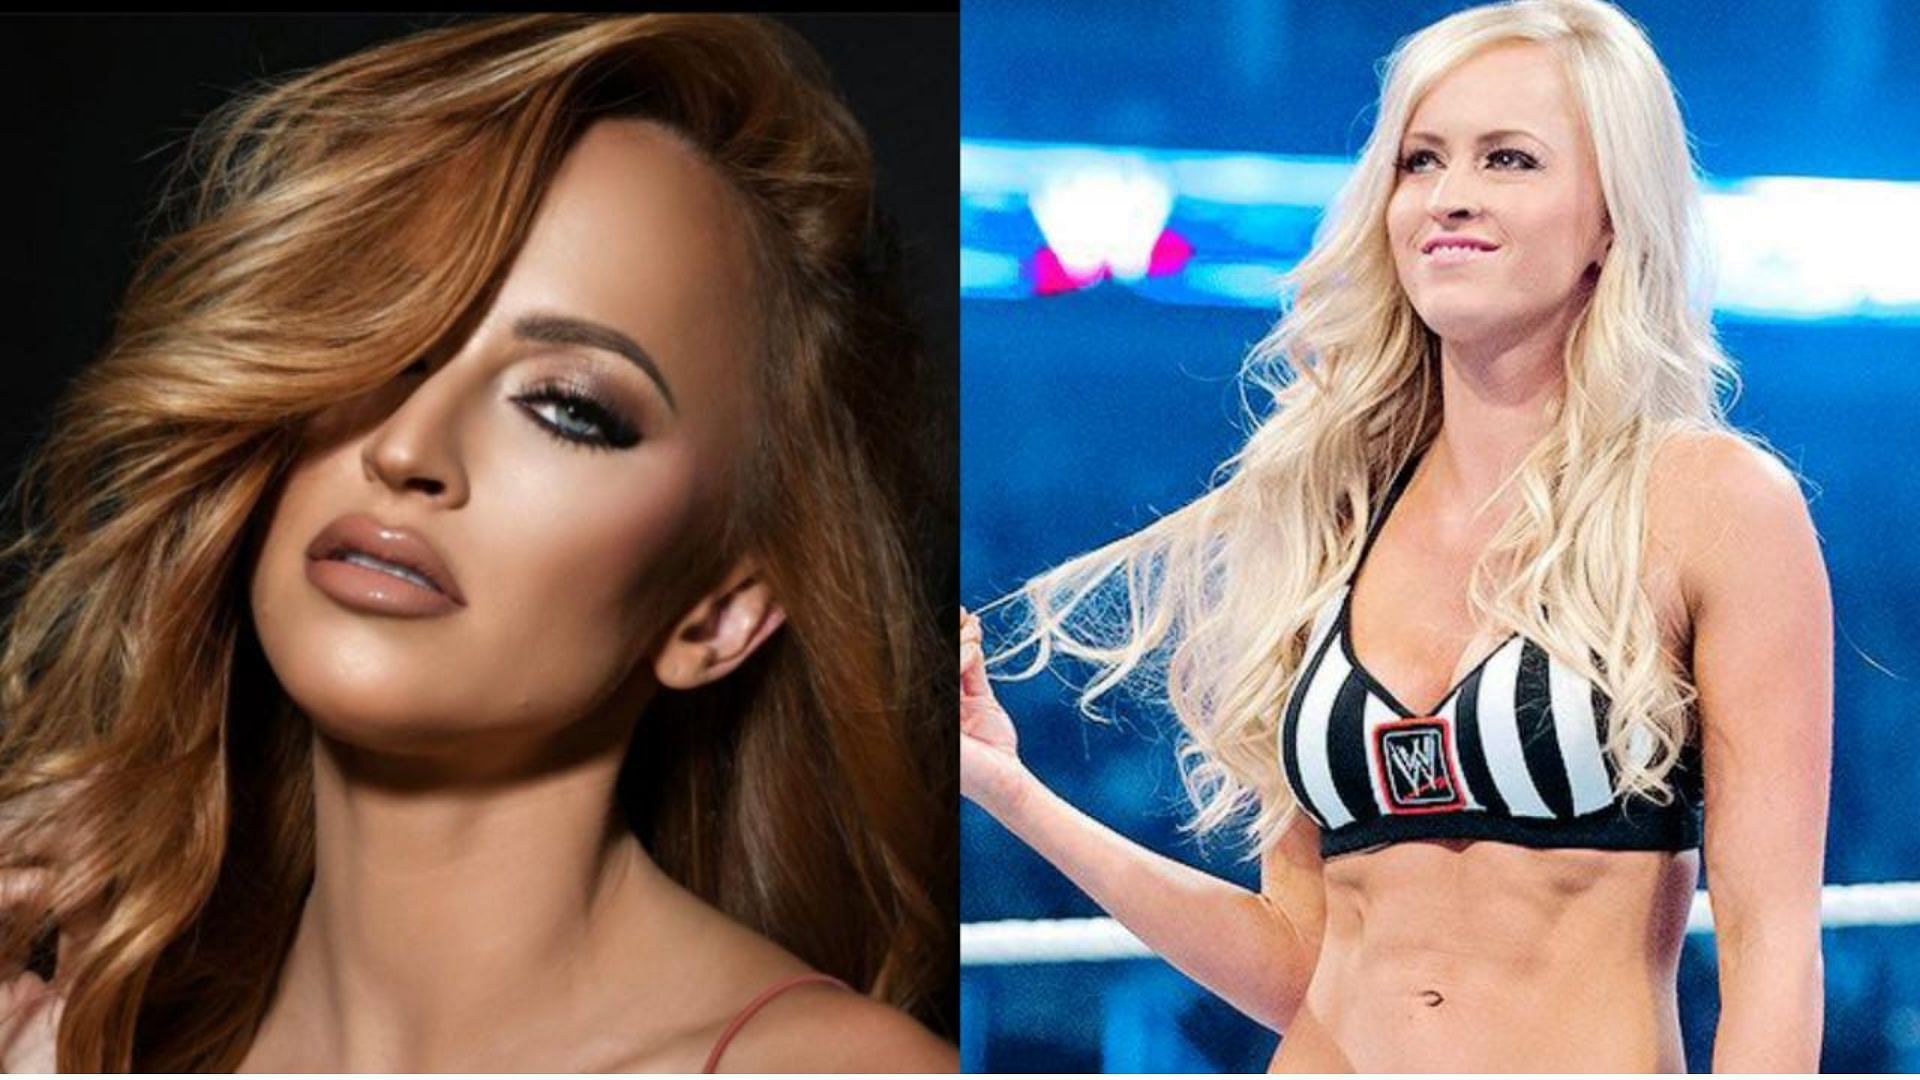 Will Summer Rae return to the squared circle anytime soon?